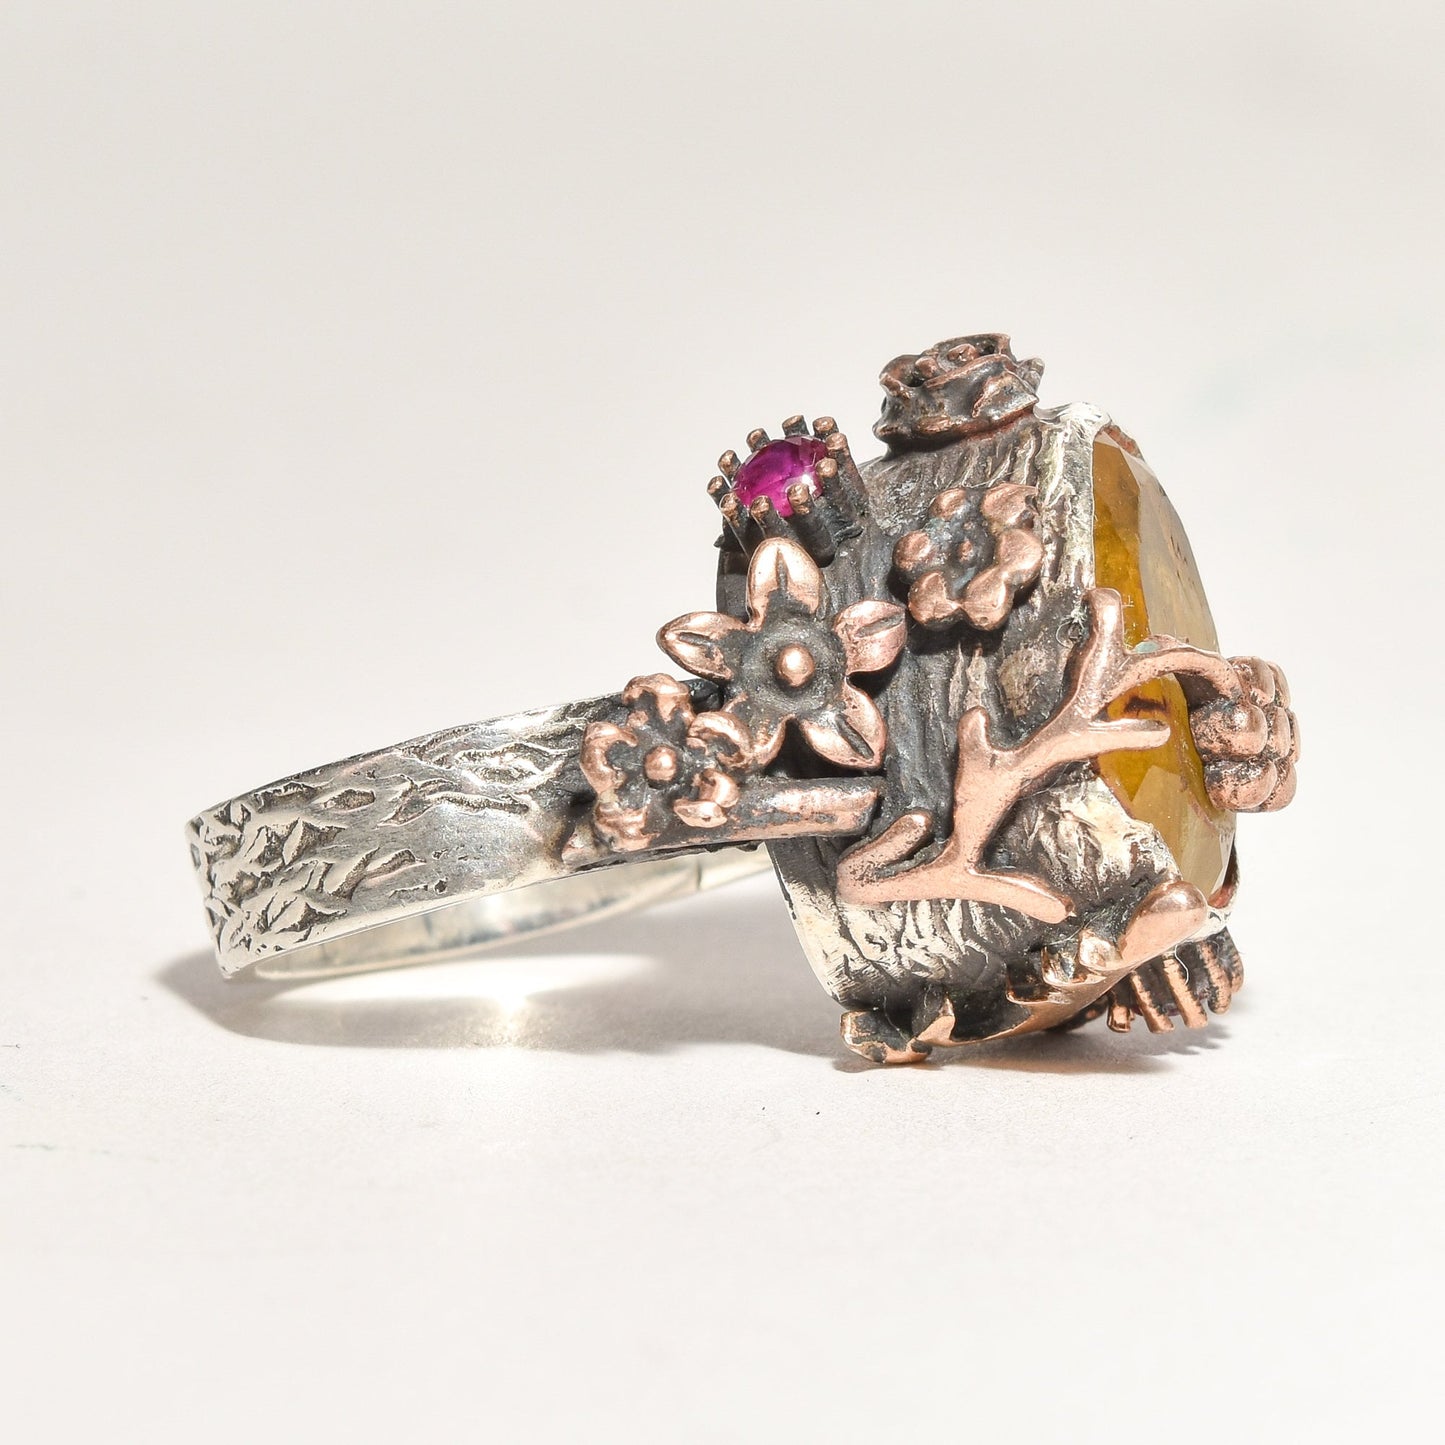 Brutalist Sterling Silver Citrine Ruby Flower Ring, Twotone Statement Ring, Size 6.25 US, showcasing textured band and floral design with gemstone accents.